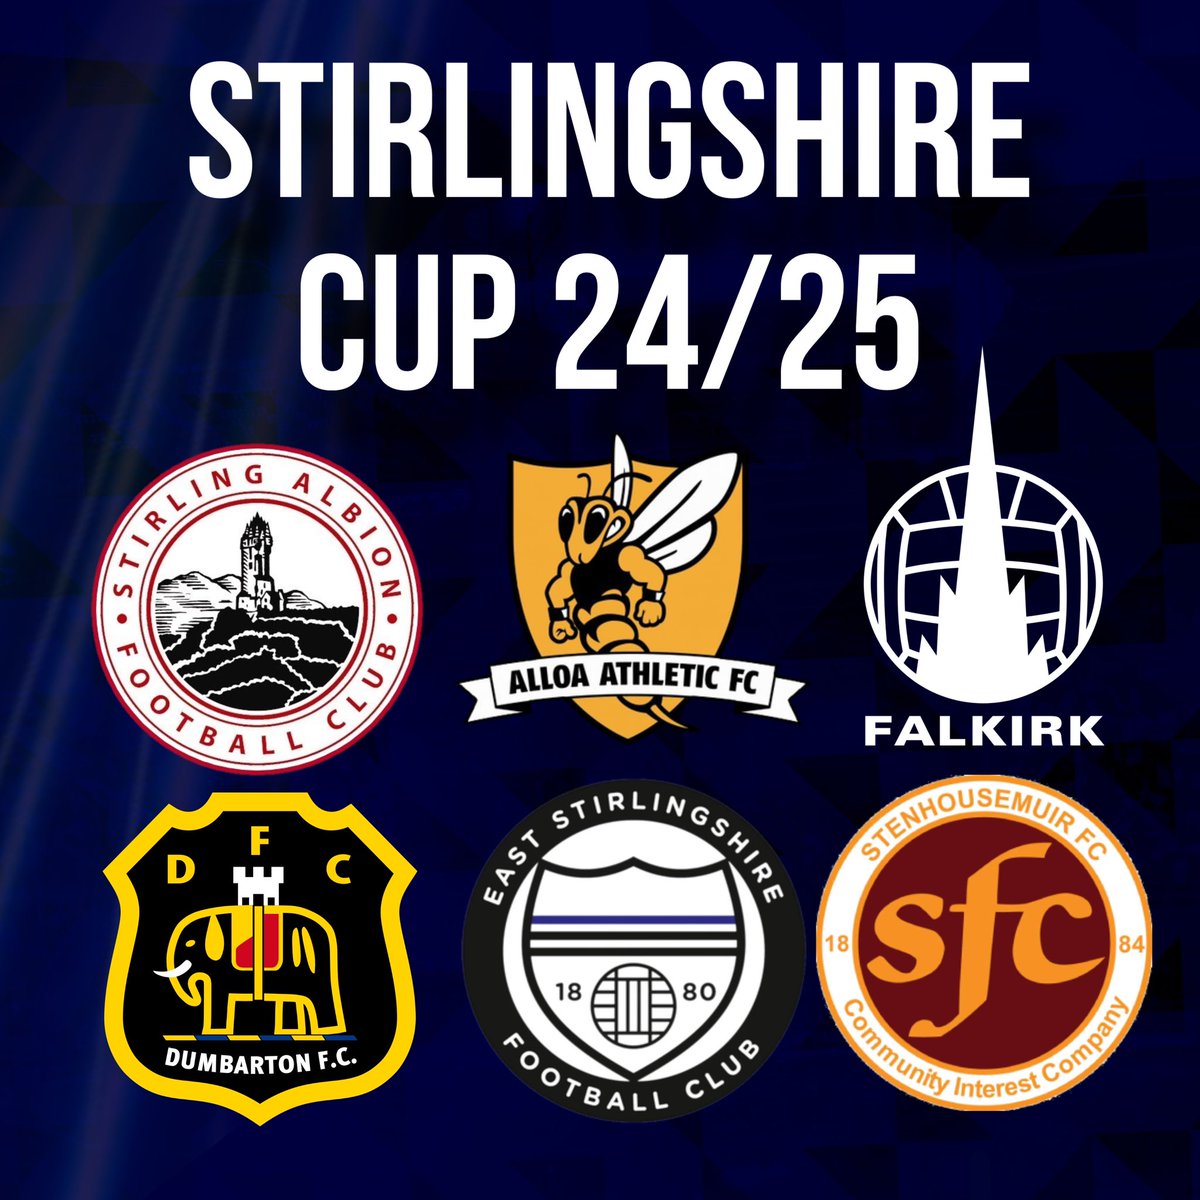 The Stirlingshire Cup is back for 24/25. 

Thoughts?